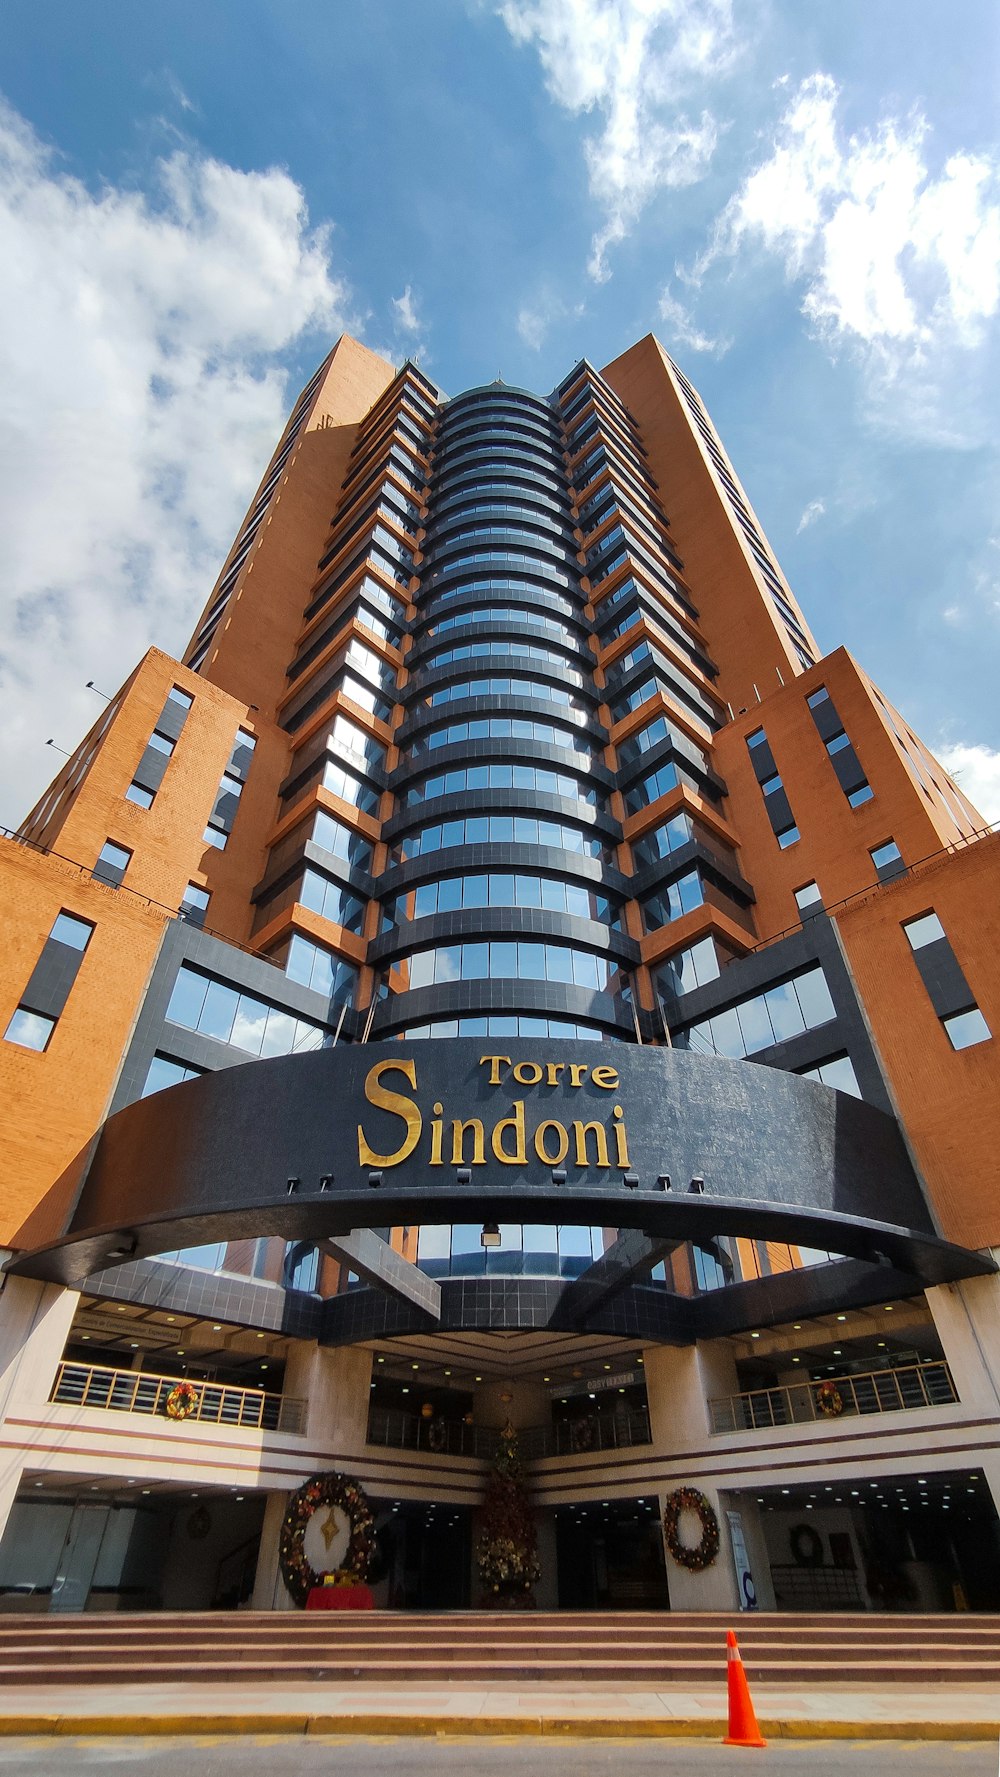 a tall building with a sign that says hotel sundon